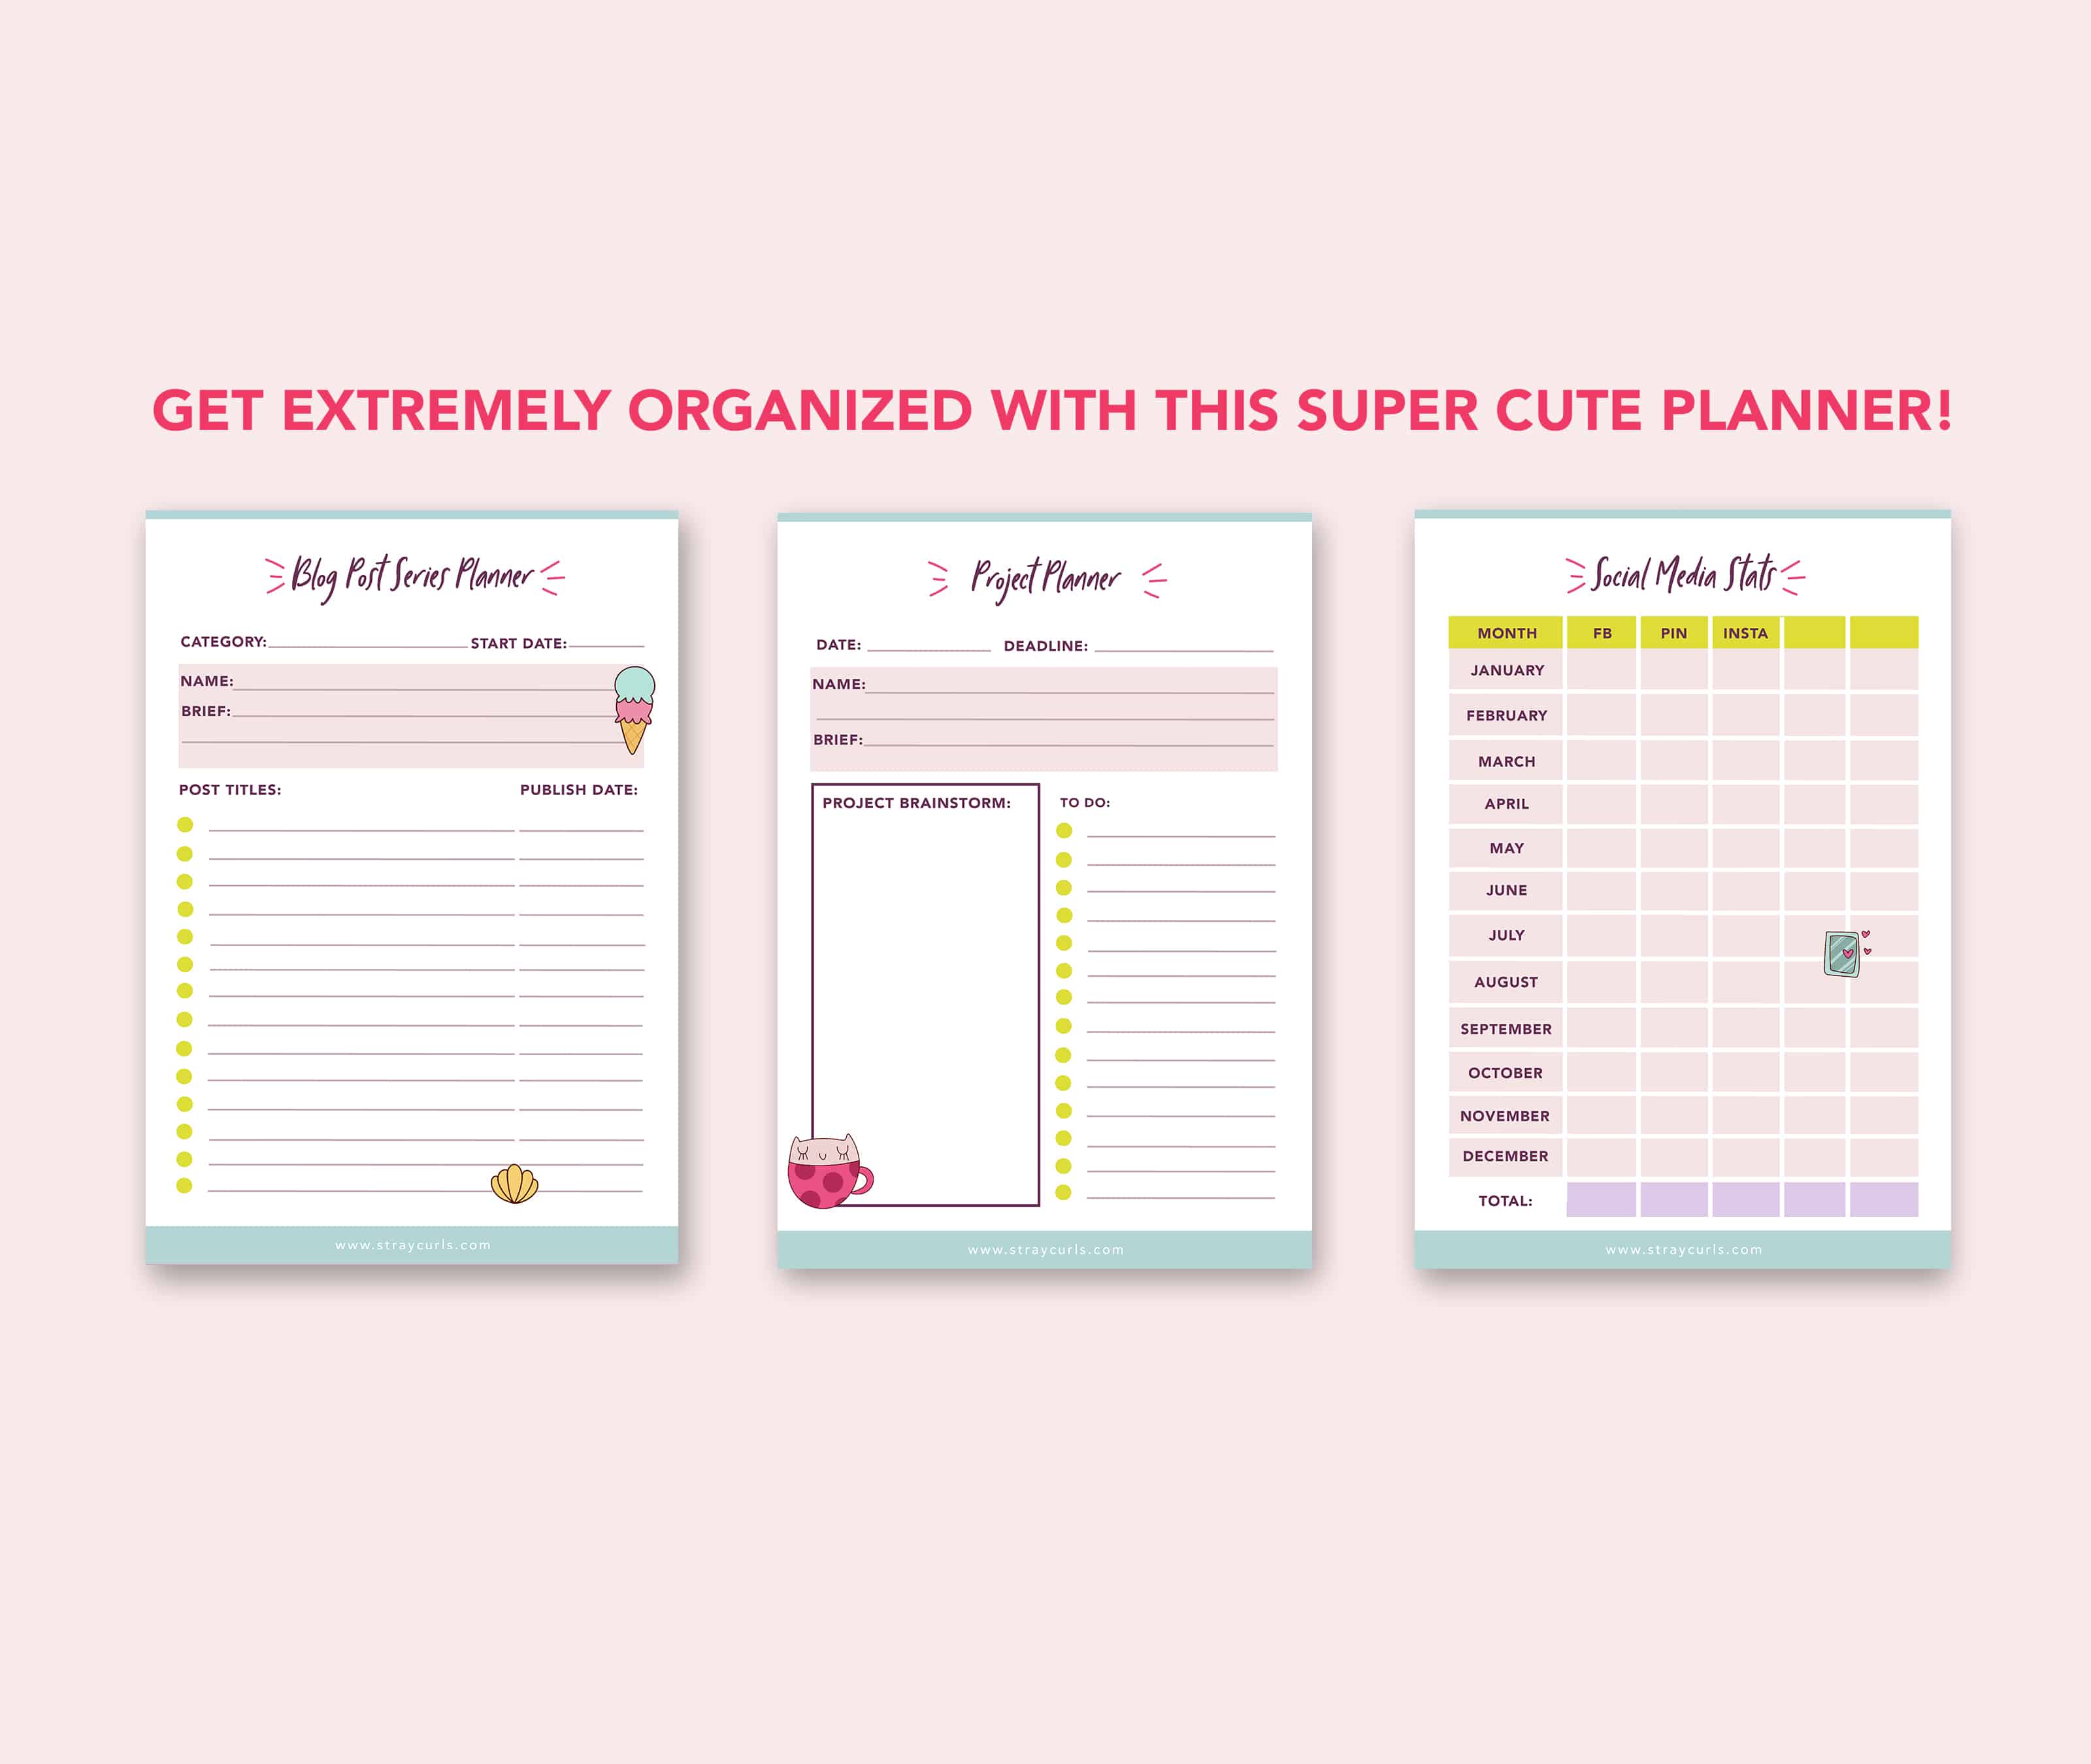 You can use my Blog Planner which consists of 45 pages to plan your Blog to keep track of all your blogging activities.